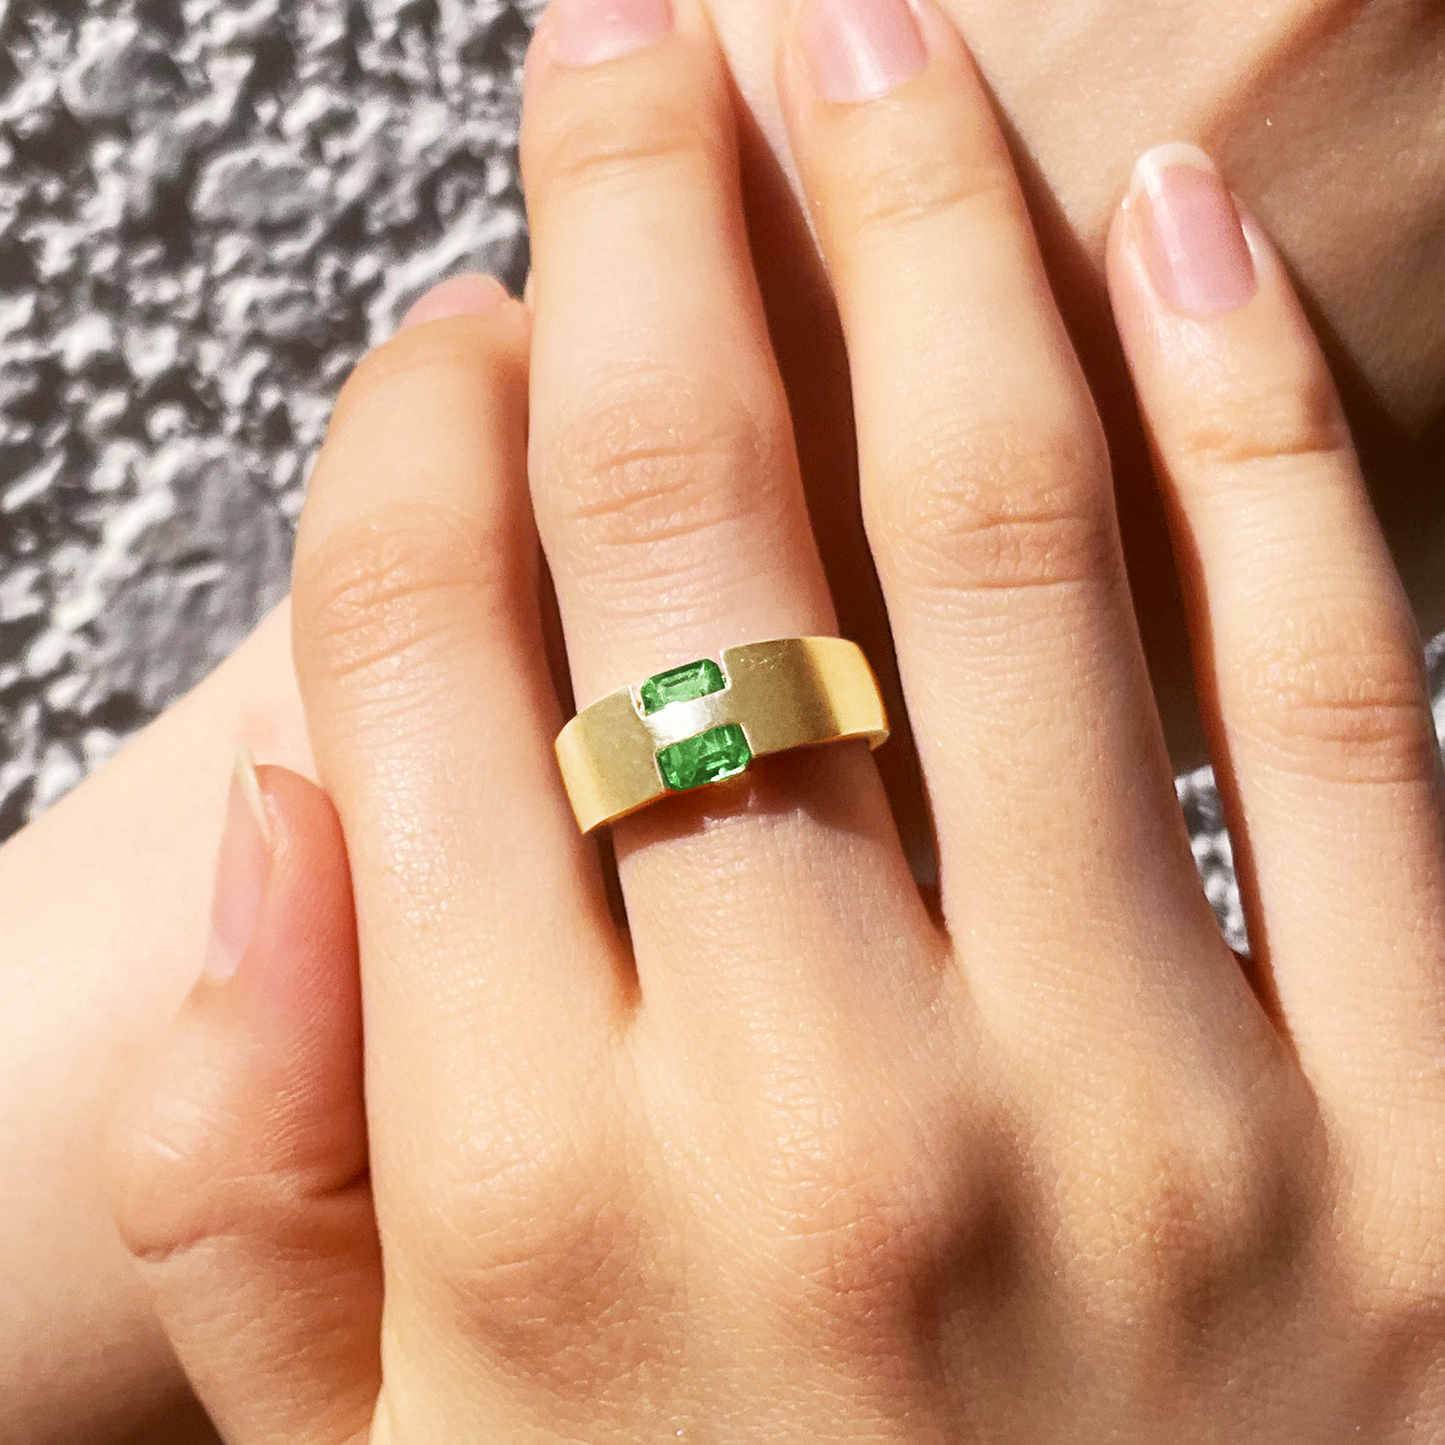 [Chrome Diopside] hide and sparkle gold #exploring